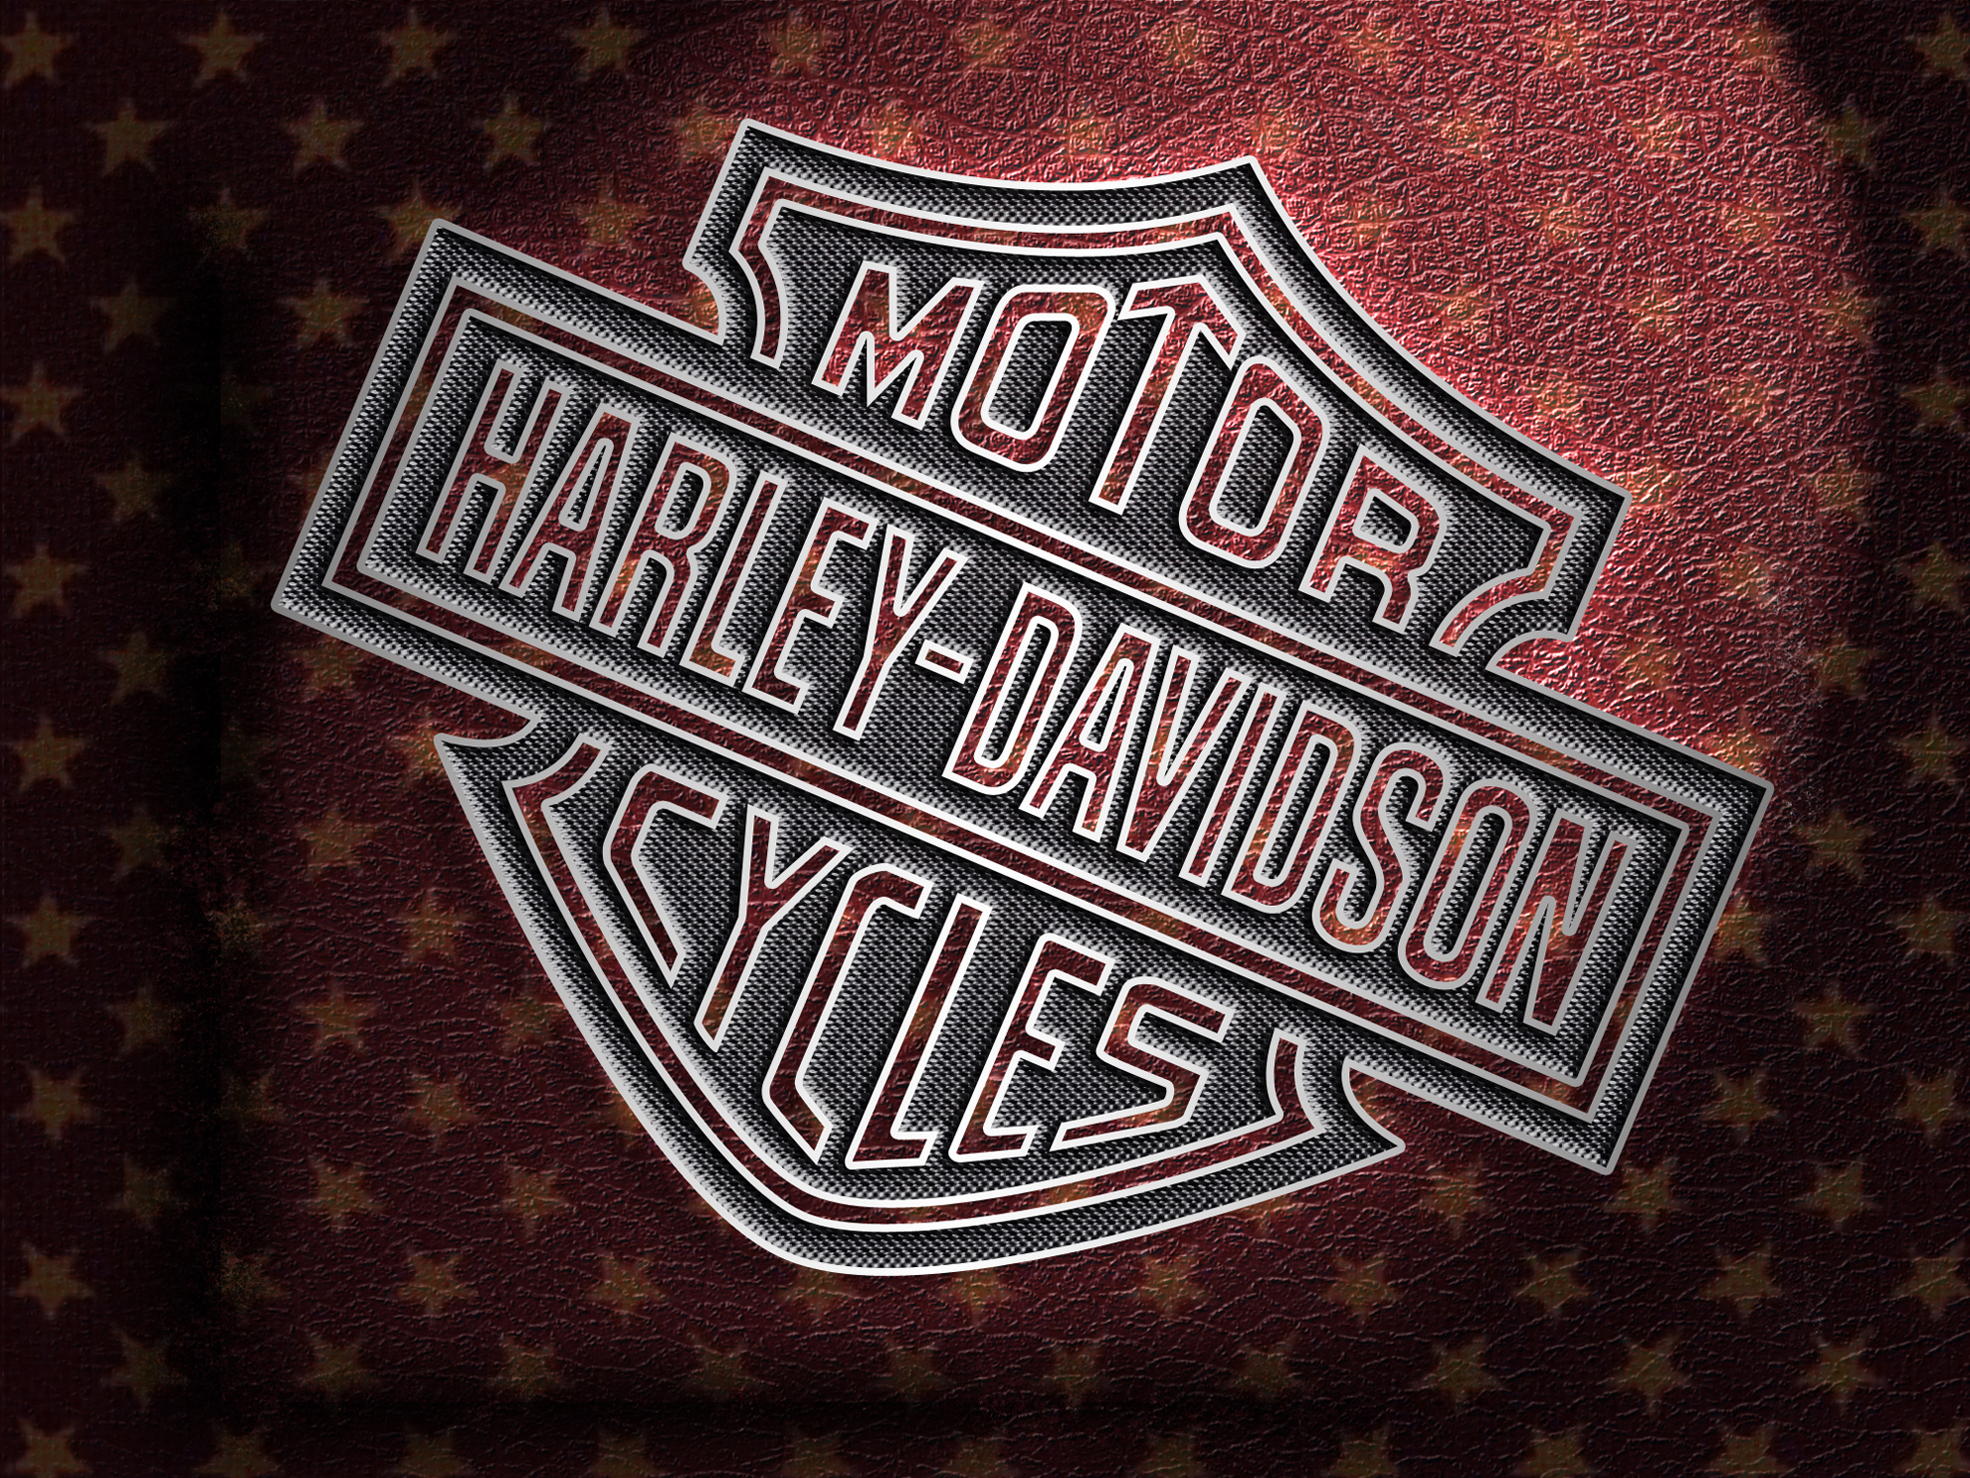 240+ Harley-Davidson HD Wallpapers and Backgrounds